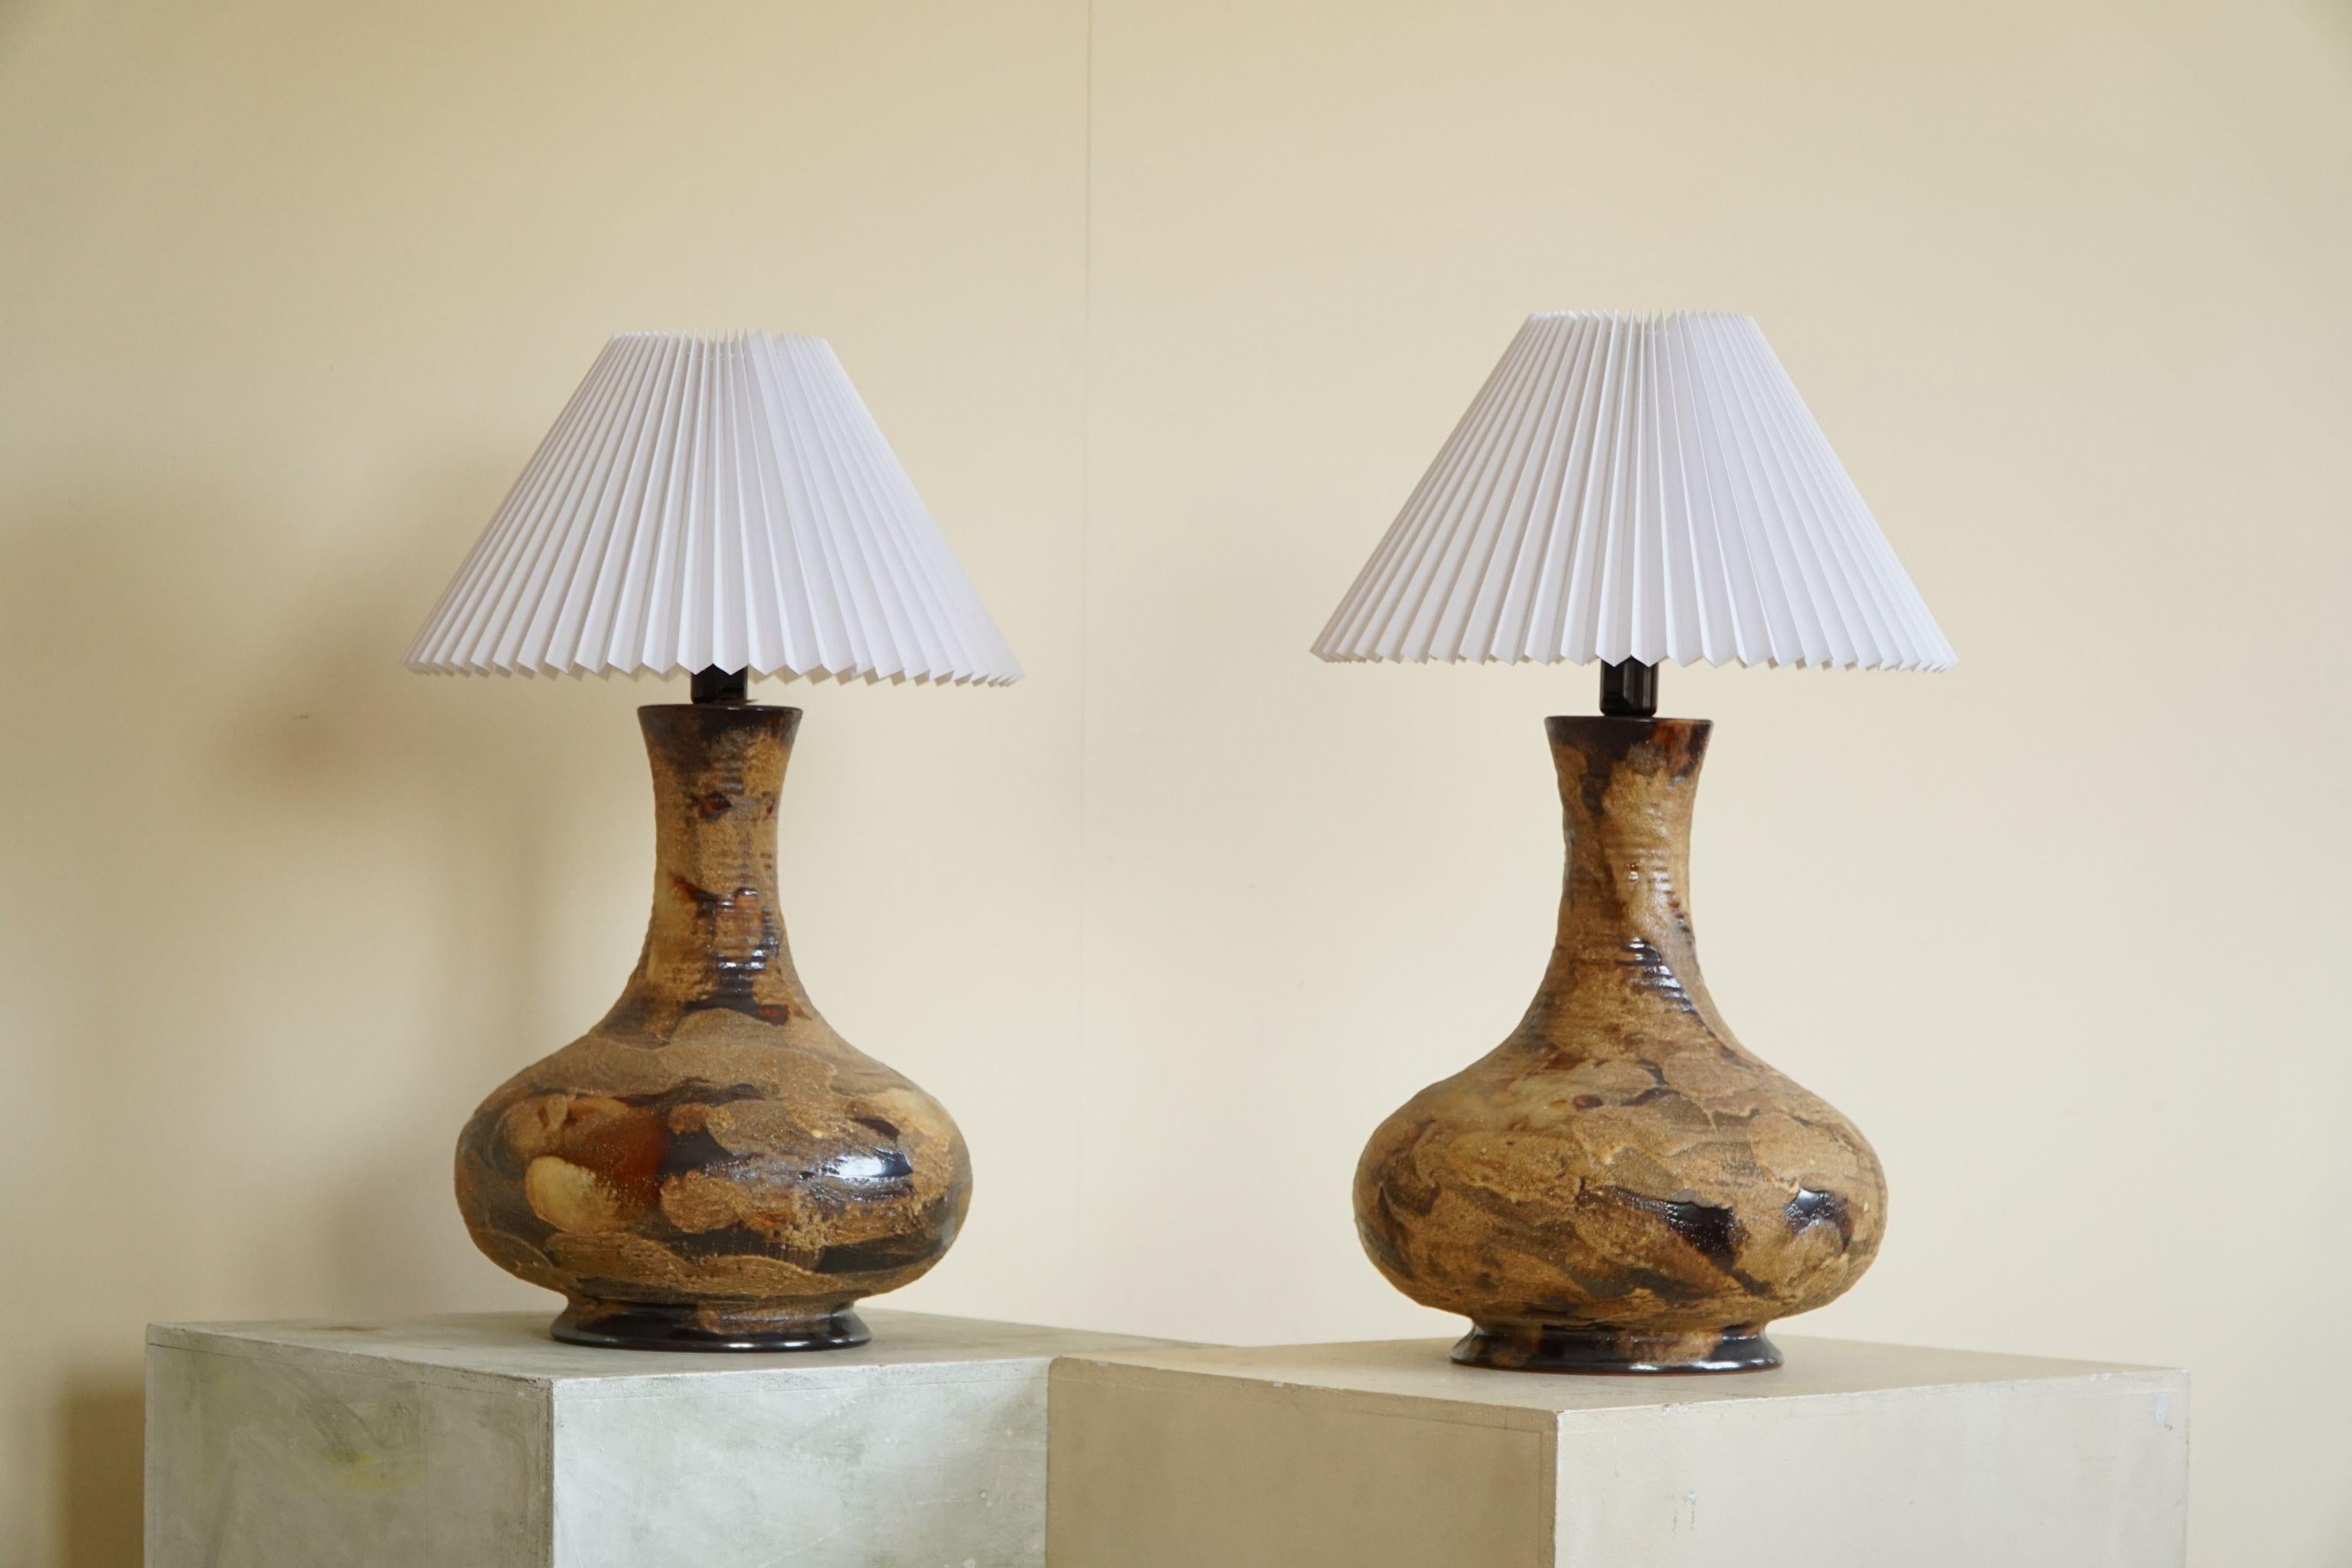 Danish Modern Pair of Large Ceramic Table Lamps, Mid Century, Made in 1970s For Sale 3